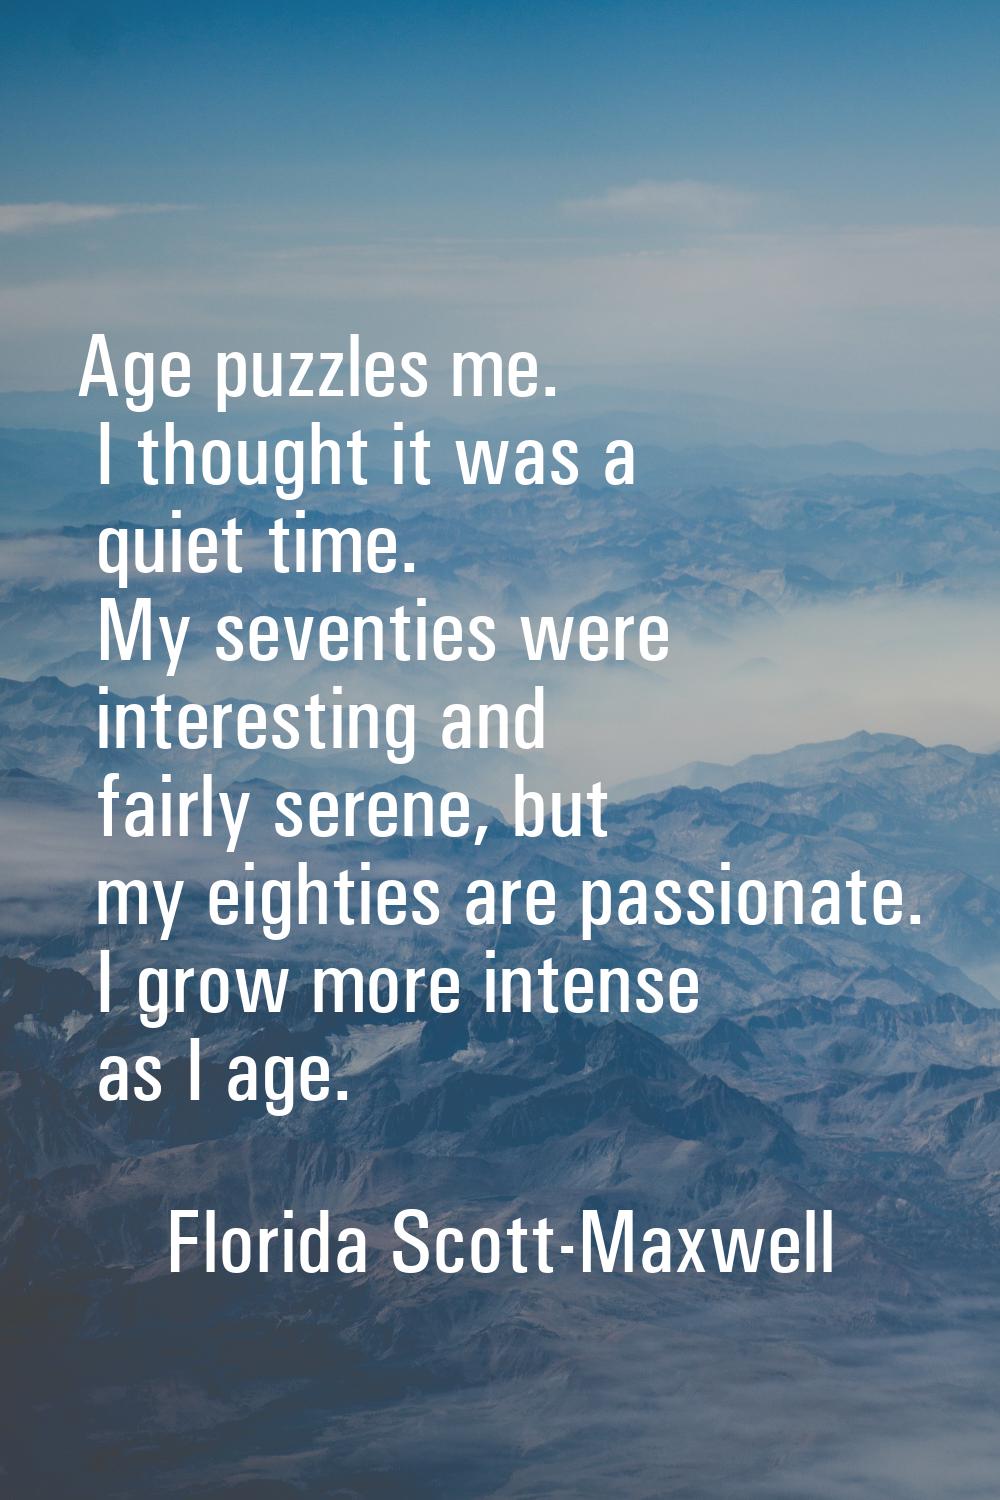 Age puzzles me. I thought it was a quiet time. My seventies were interesting and fairly serene, but